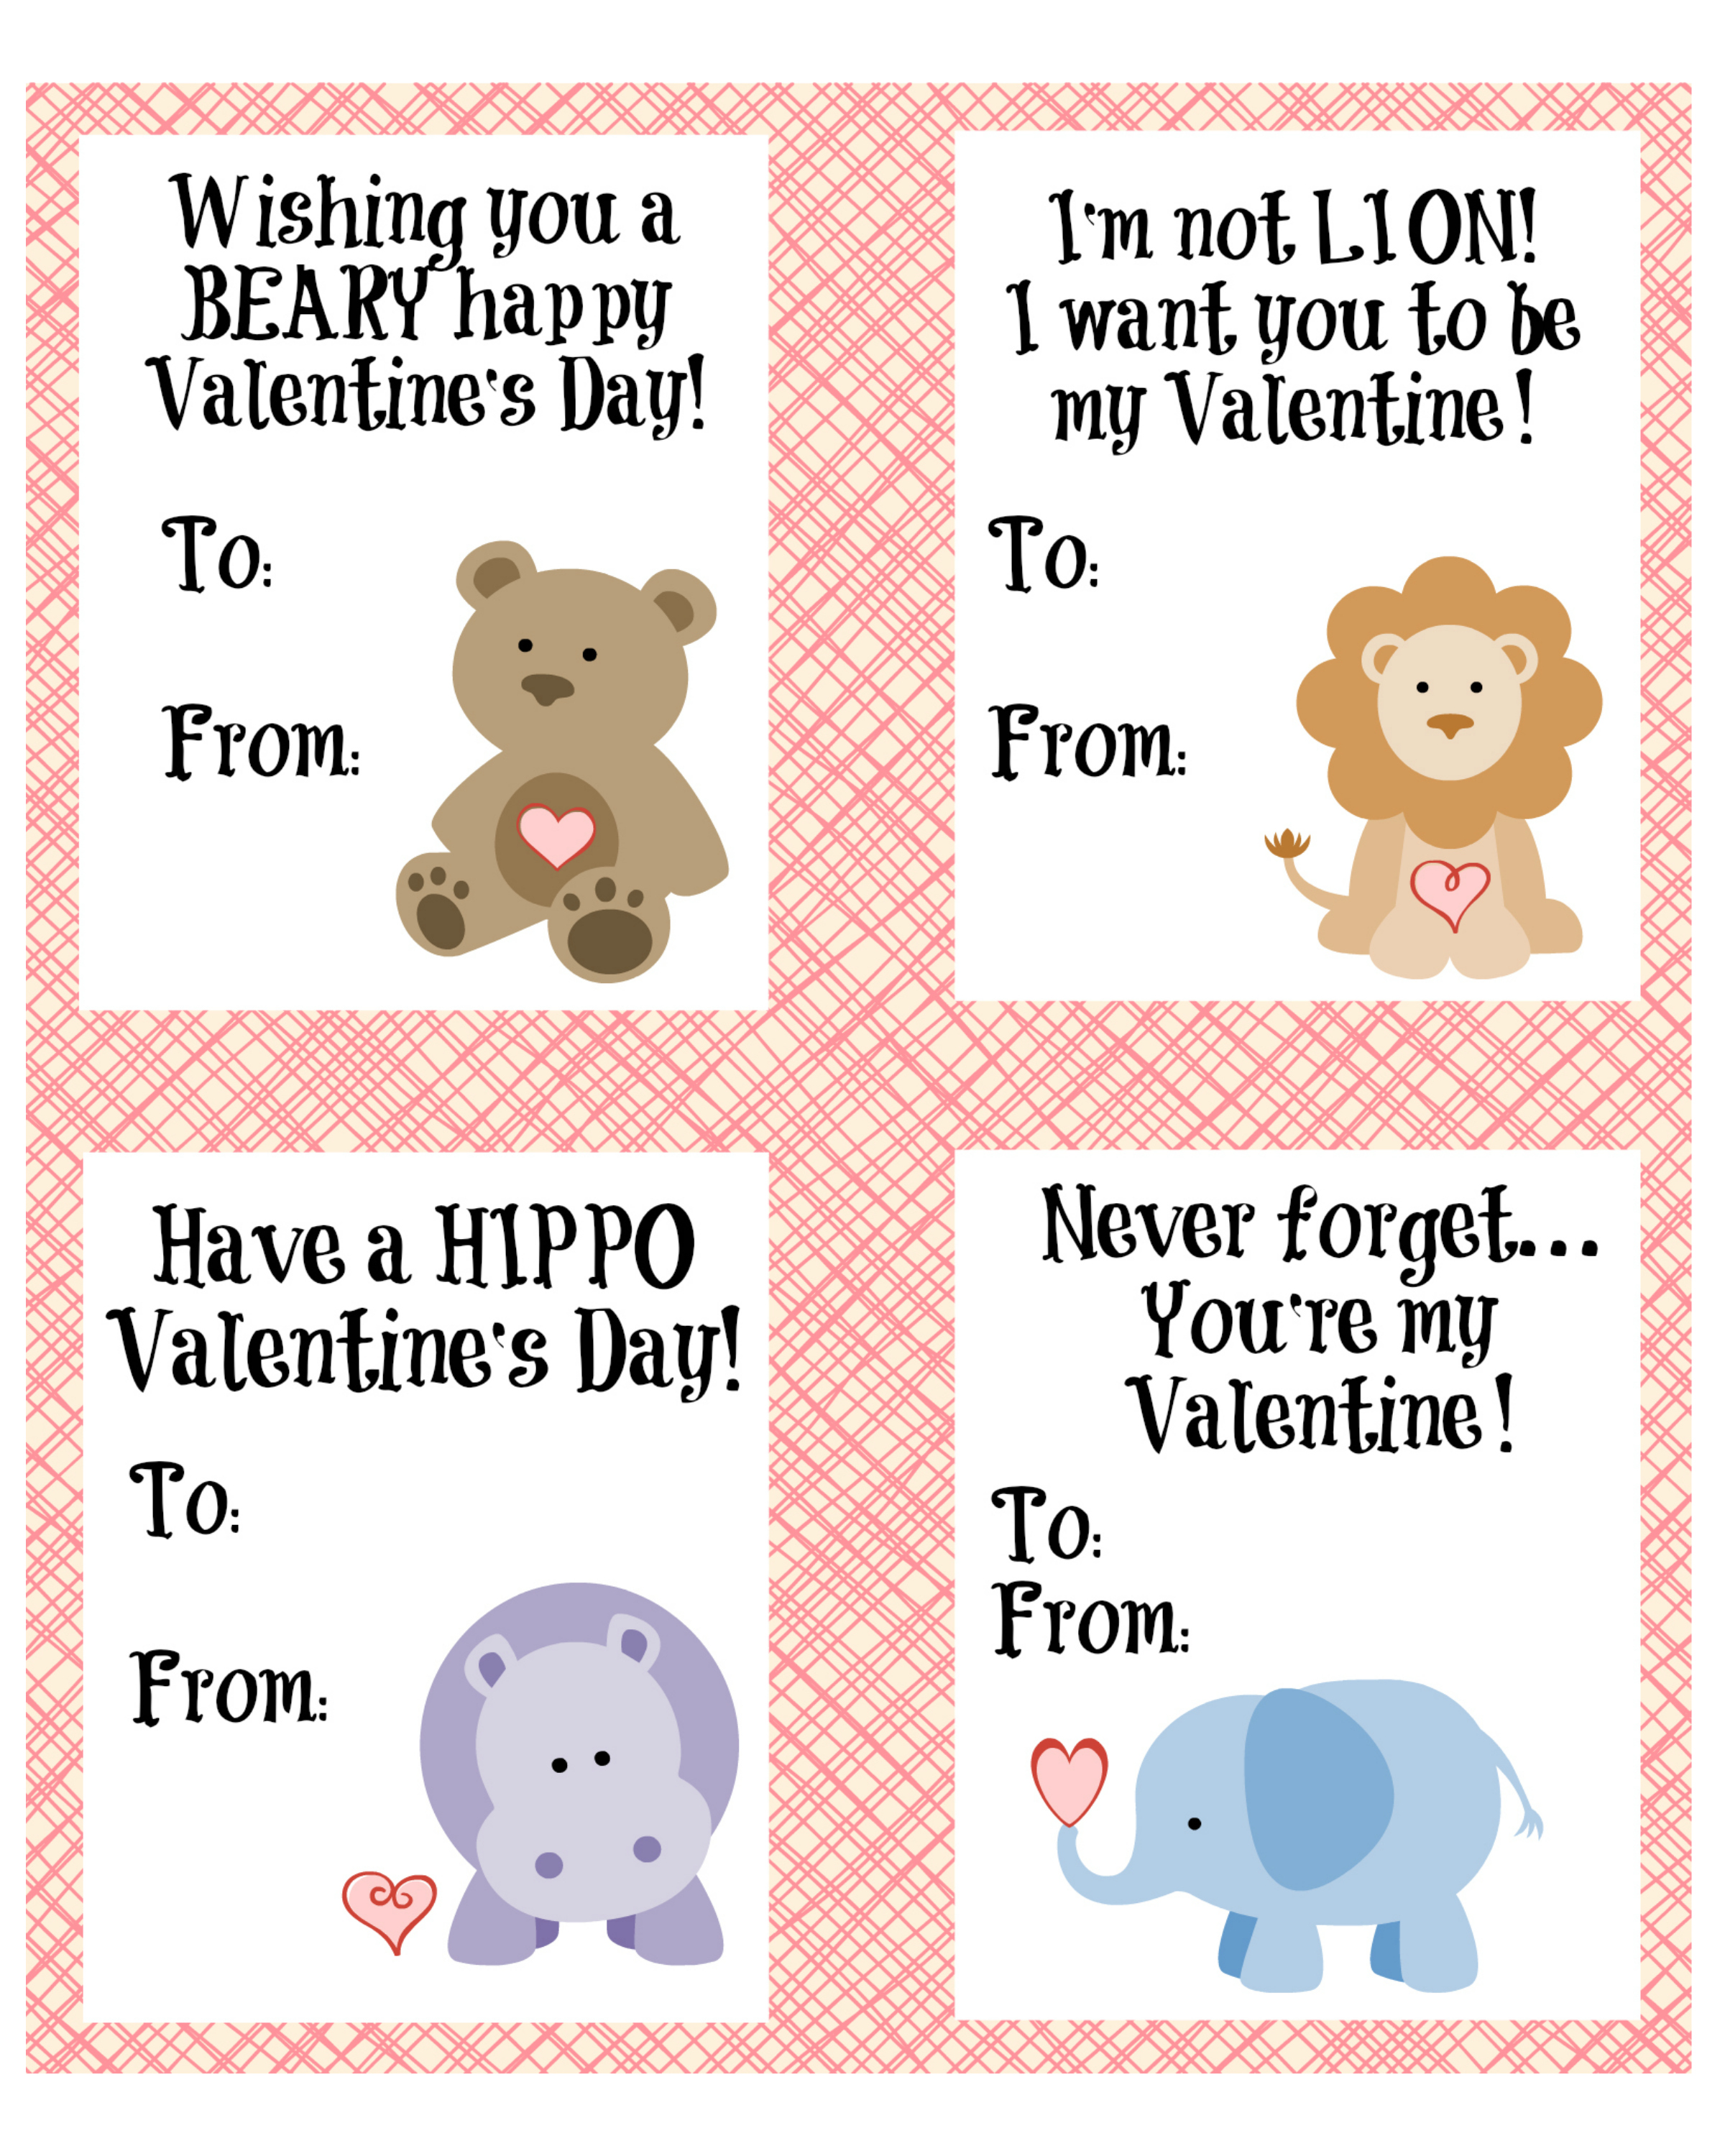 Cute Animal Valentine’s Day Cards Free Printable